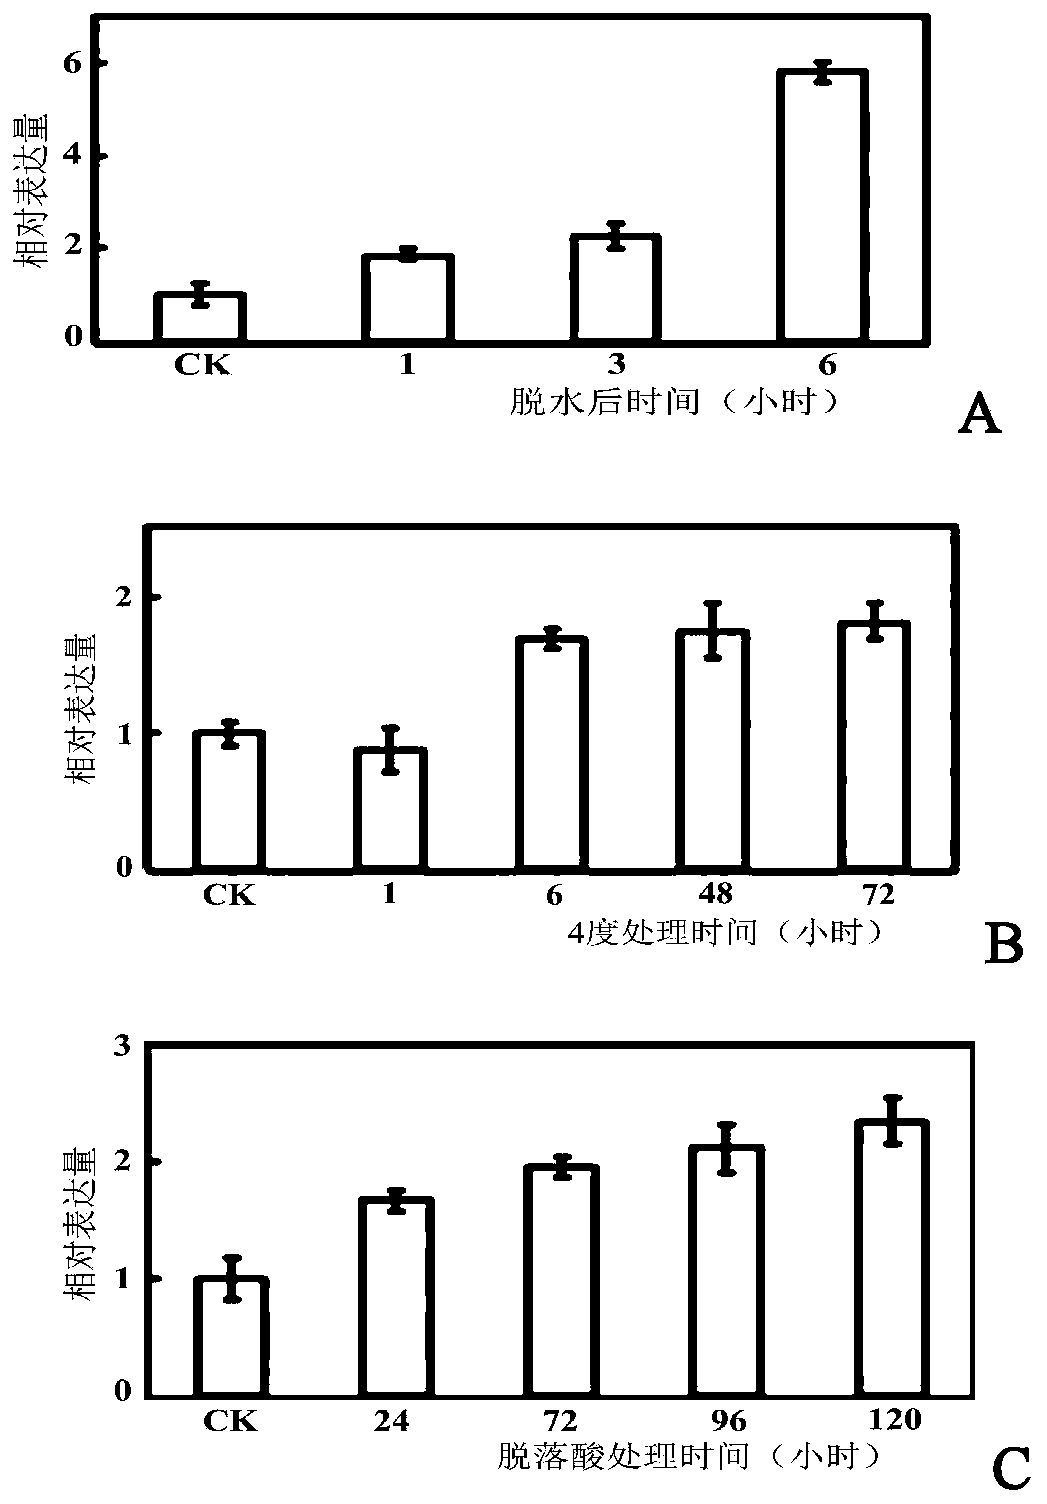 Pear drought-inducible transcription factor pbrwrky53 and its application in improving plant drought resistance